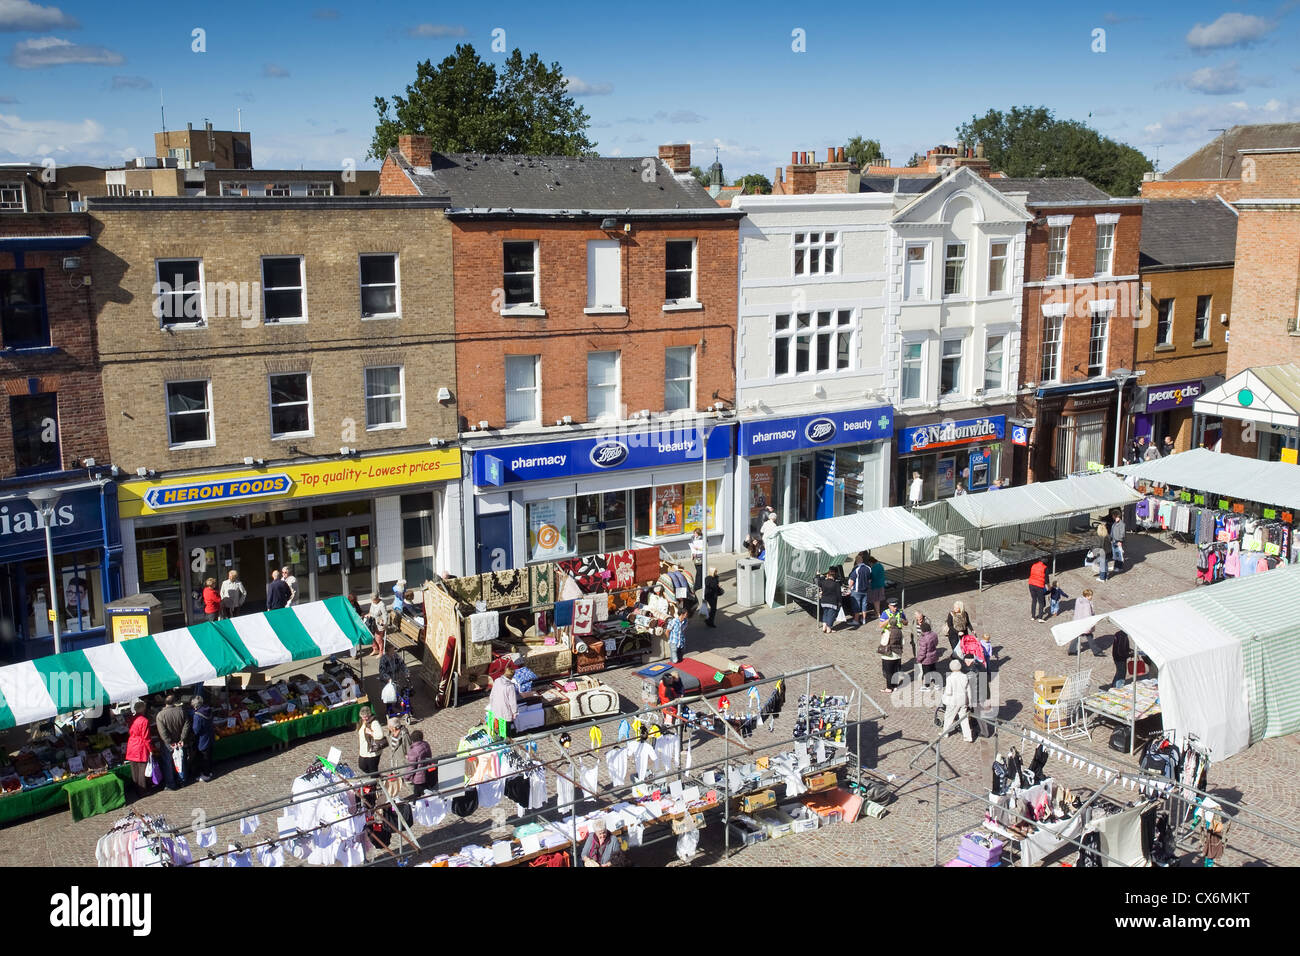 The outdoor market in Market Square in the Lincolnshire Market Town of Gainsborough. Stock Photo